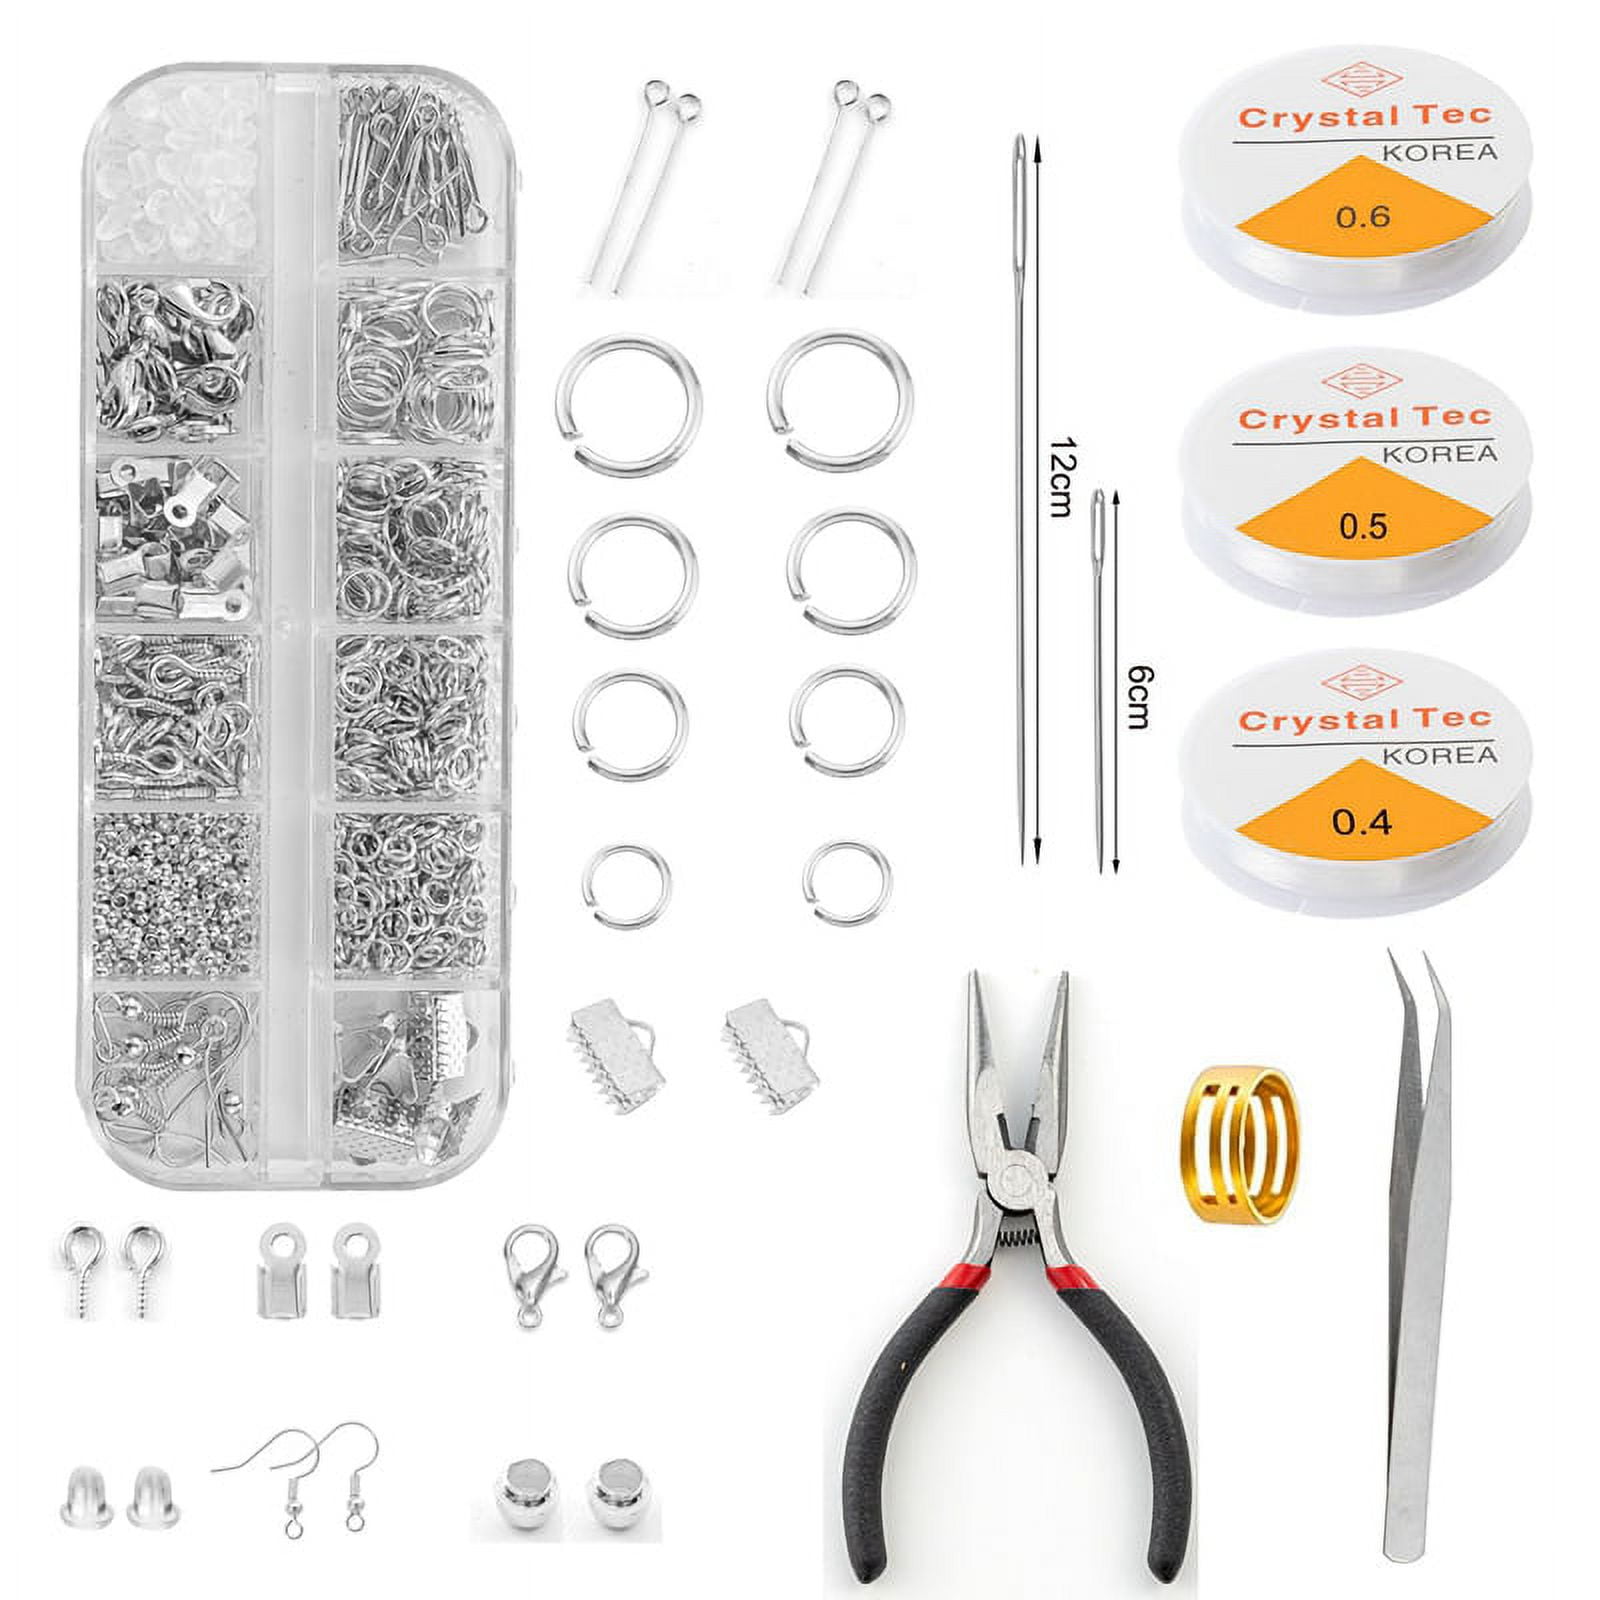 Glarks 951Pcs Making Supplies Kit with Jewelry Tools, Includes Pliers,  Jewelry Wires, Jewelry Findings for Jewelry Making and Repair